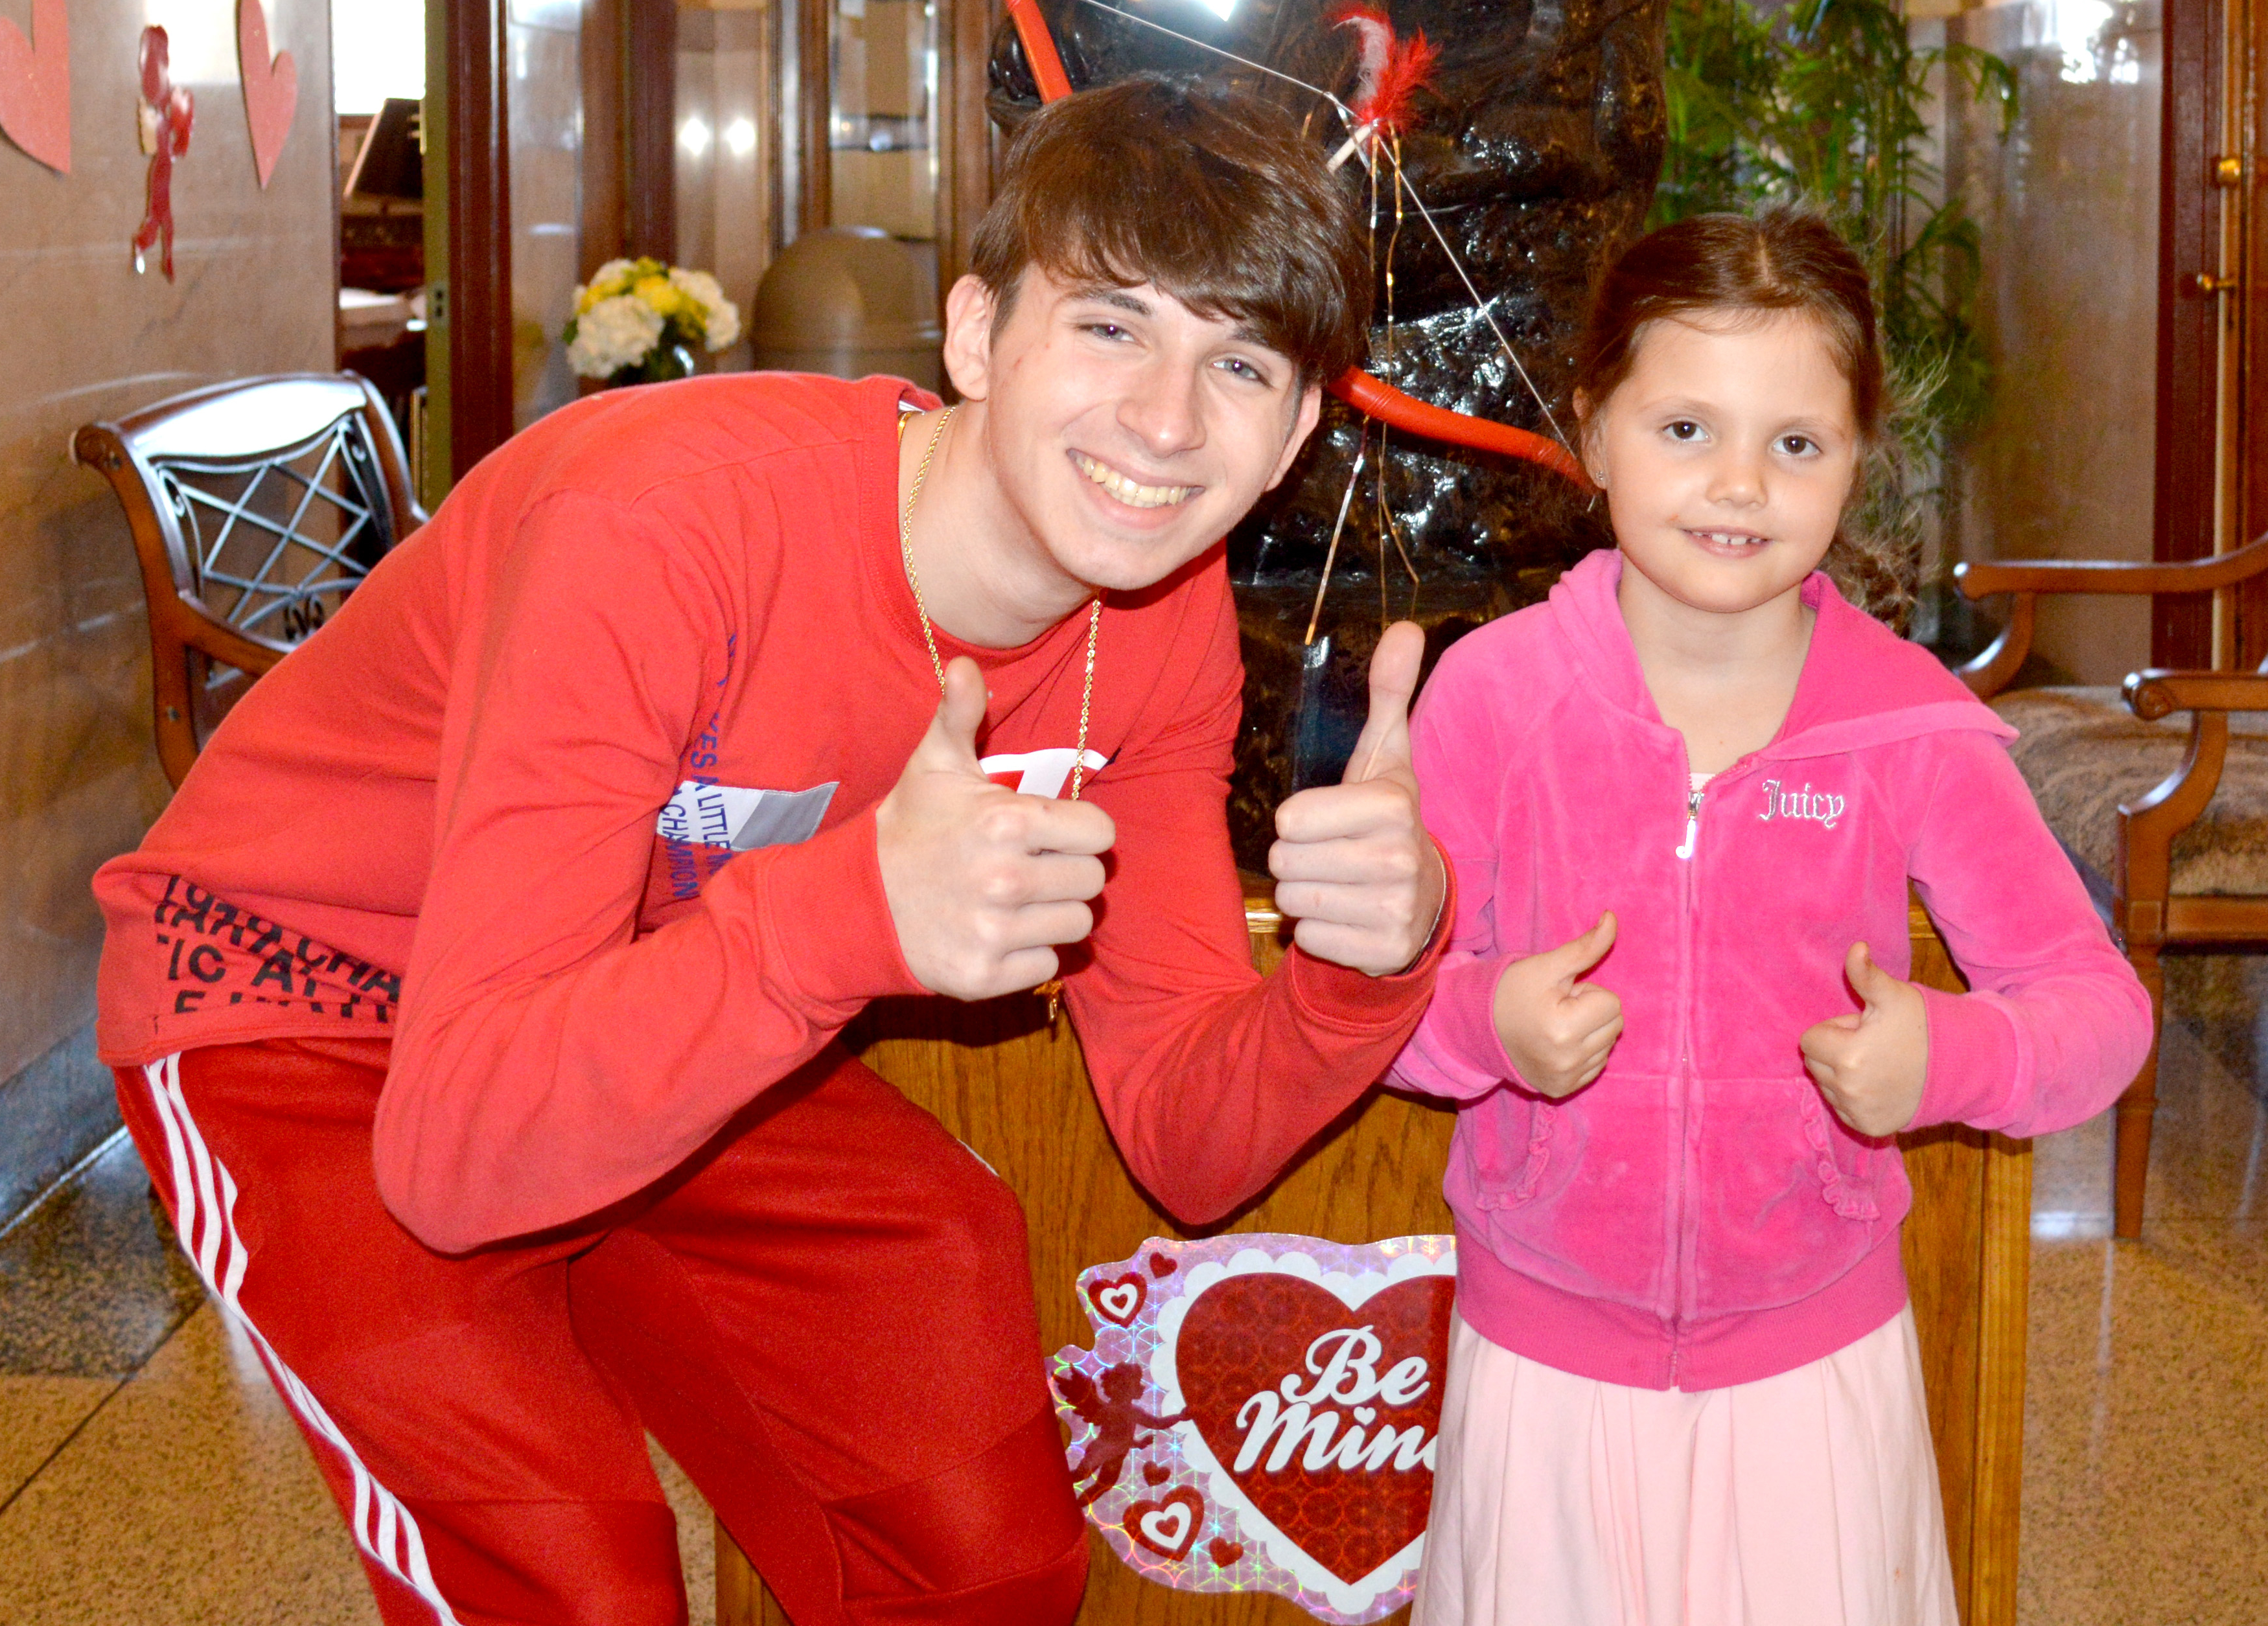 Upper Schooler Joe and Lower Schooler Nicole share a thumbs up on Valentines Day!